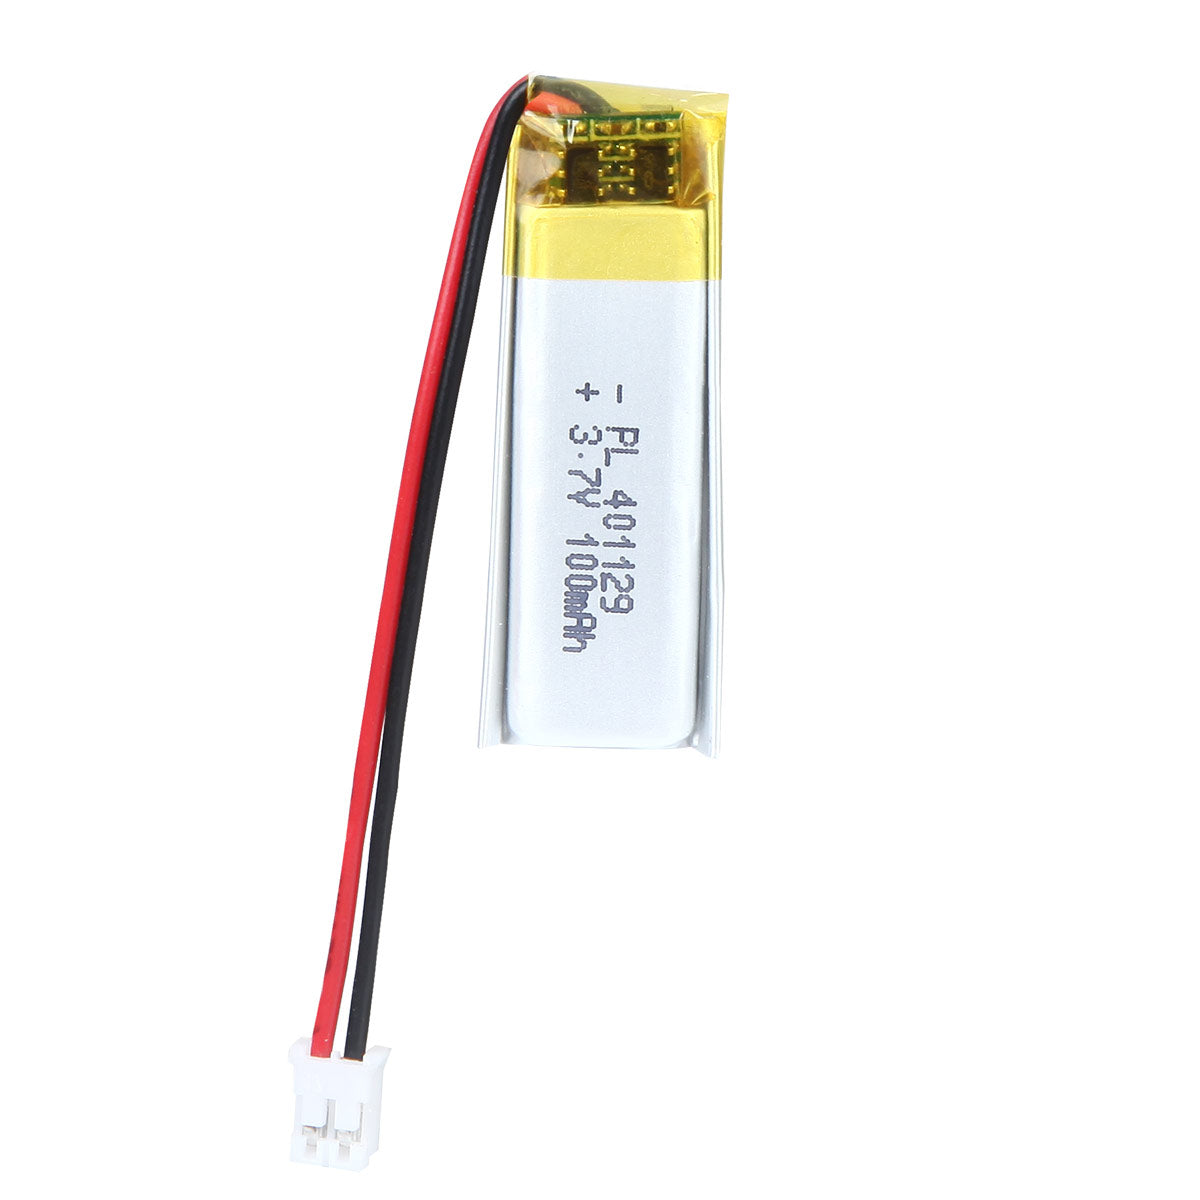 YDL 3.7V 100mAh 401129 Rechargeable Polymer Lithium-Ion Battery